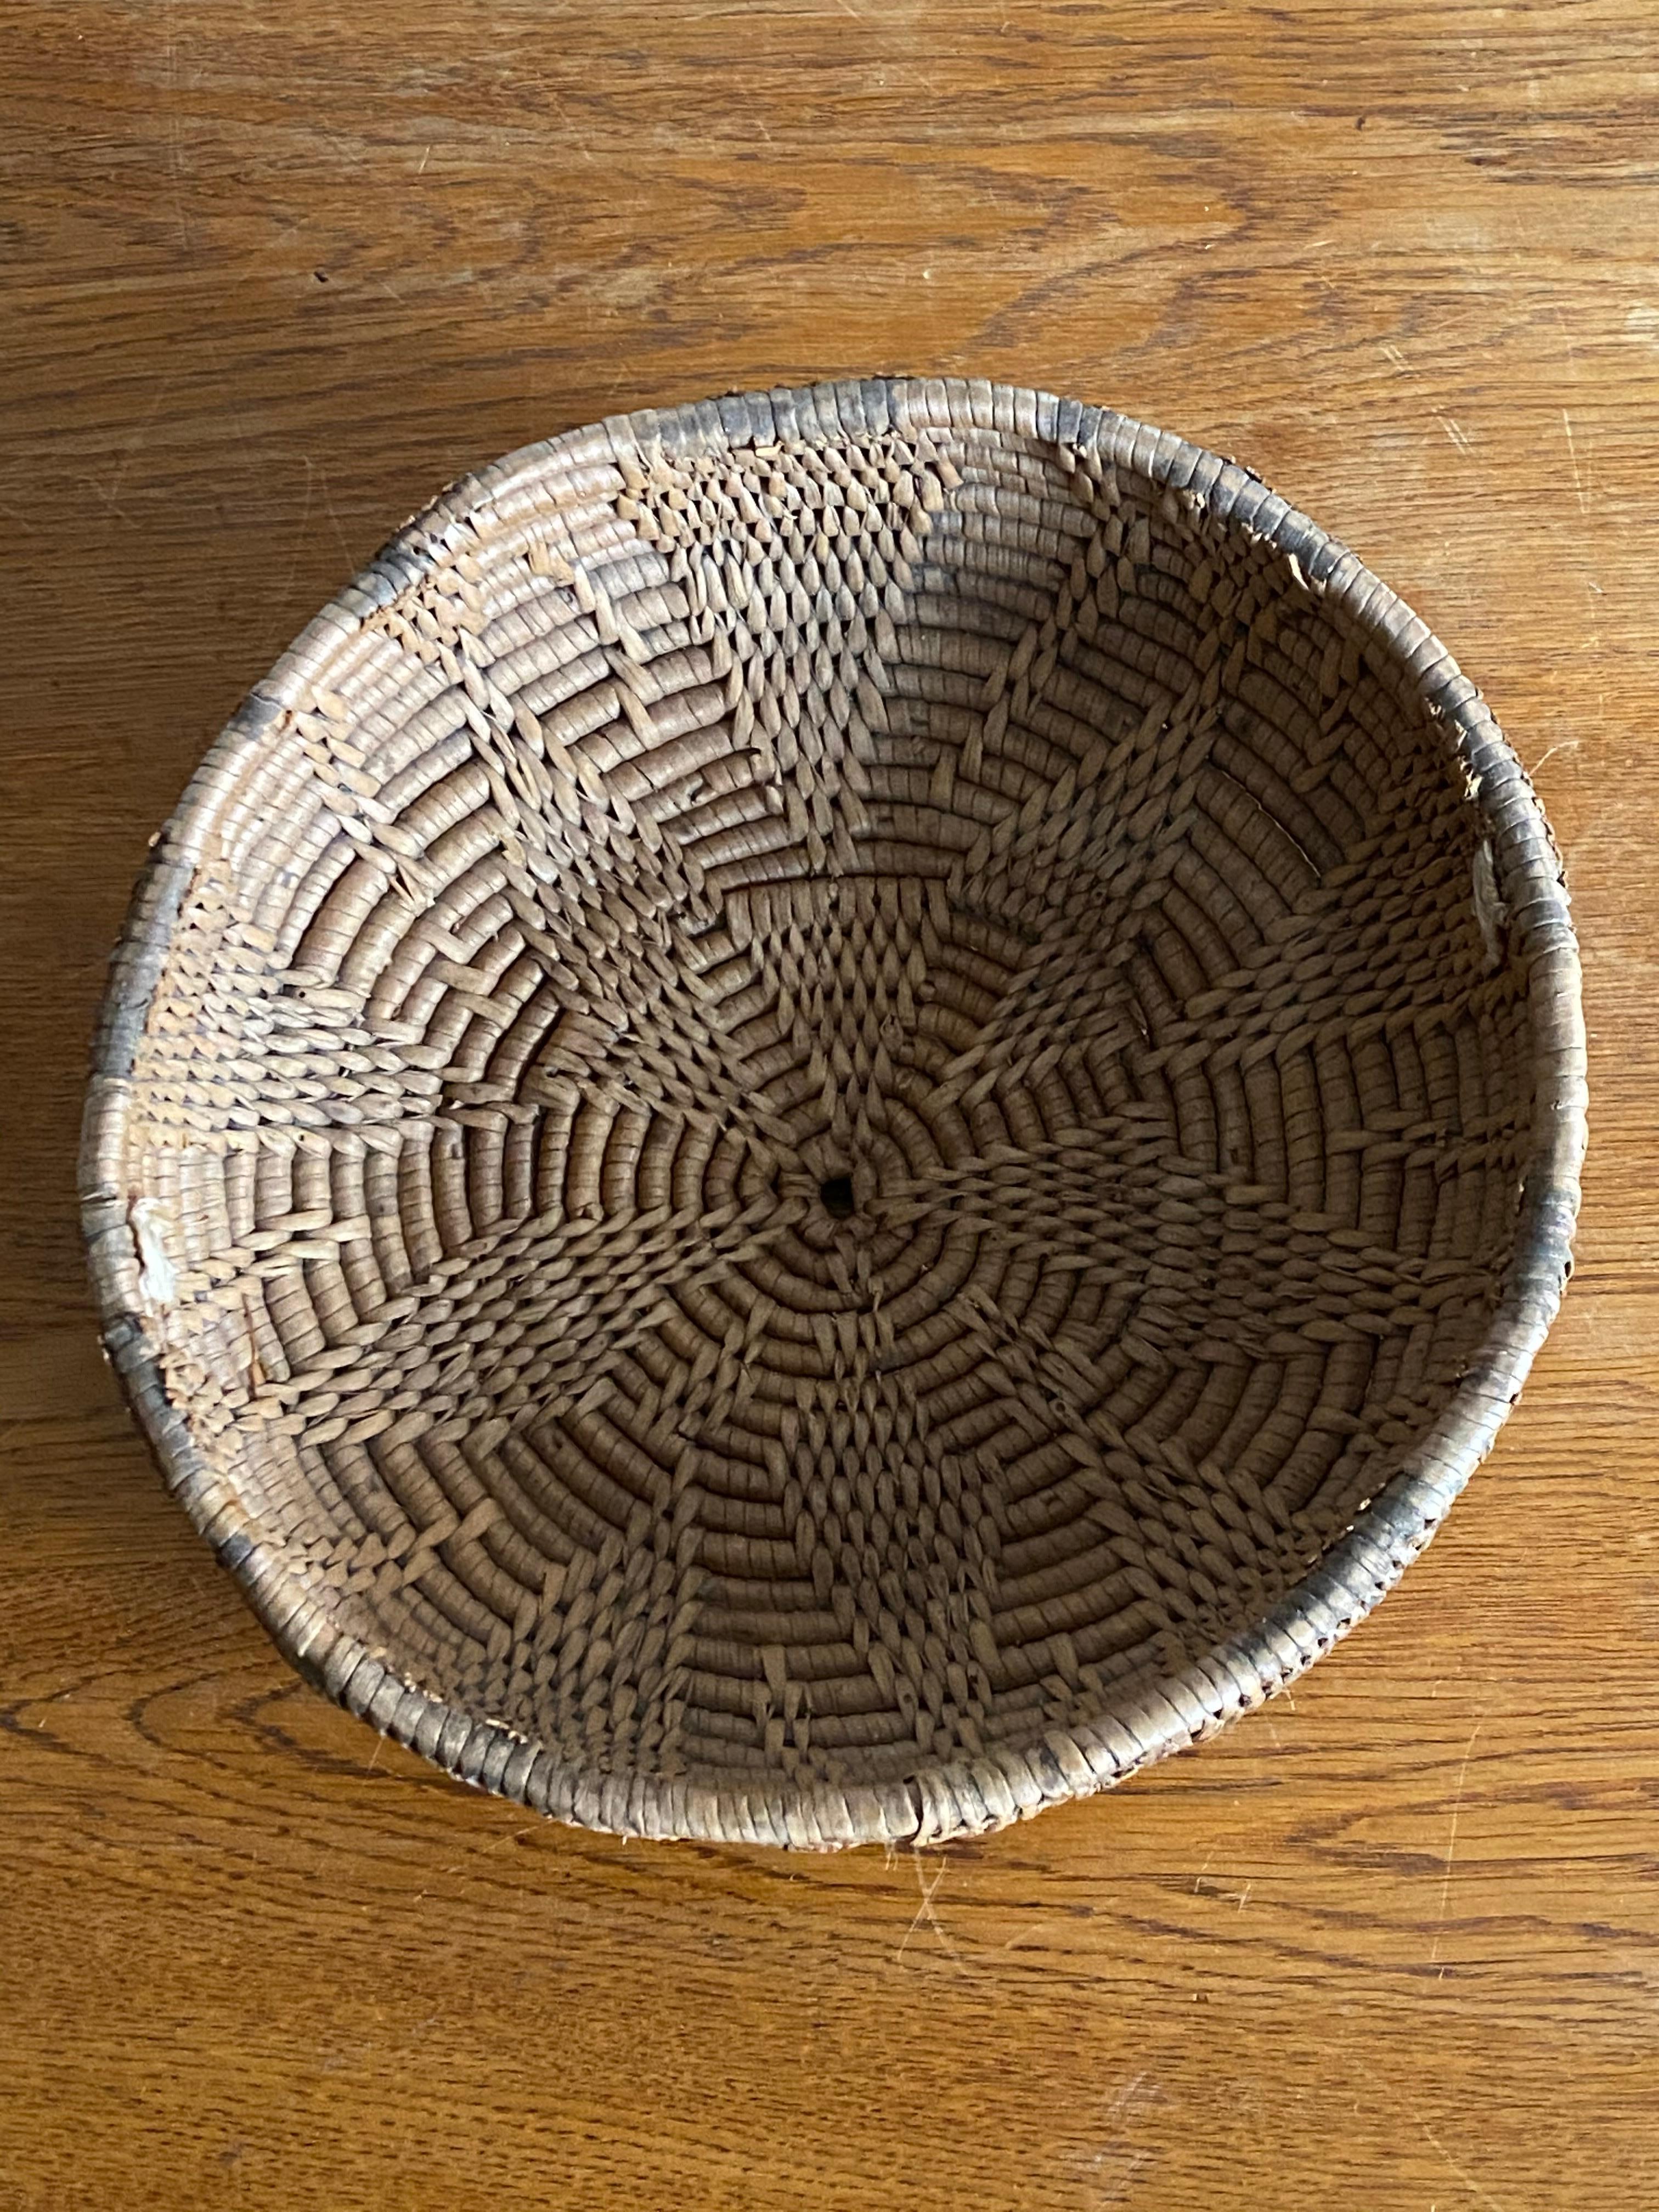 Swedish Craft, Basket or Bowl, Woven Fir Root, Sweden, 19th Century 3